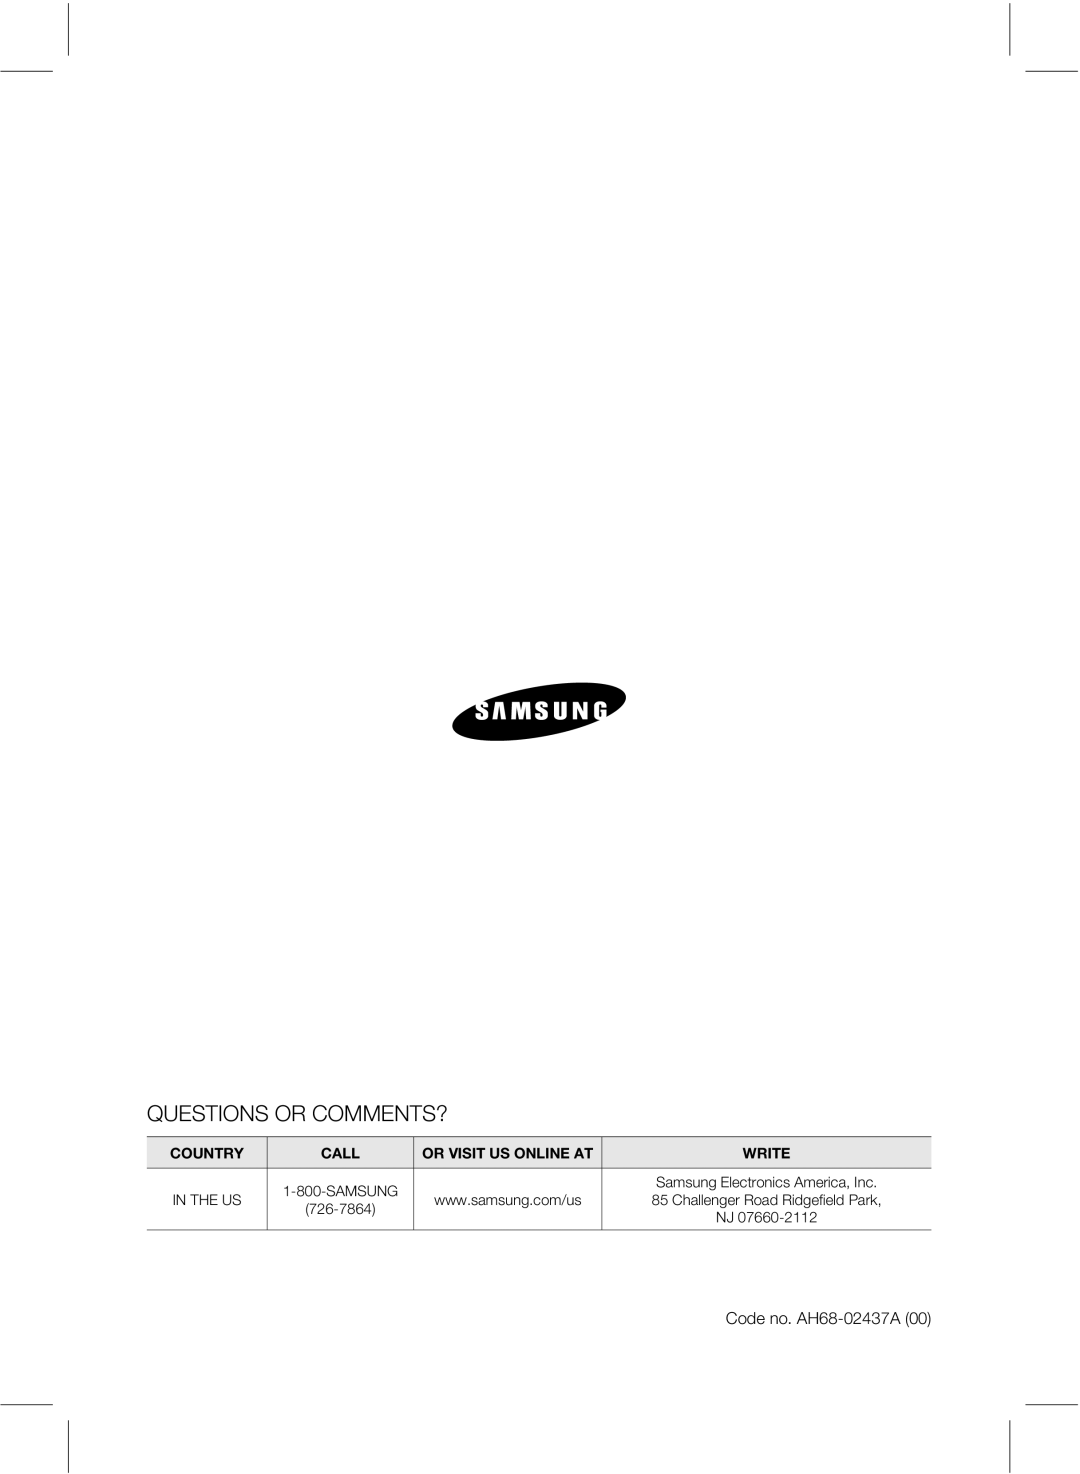 Samsung HWE550 manual Questions Or Comments?, Country, Call, Or Visit Us Online At, Write, In The Us 